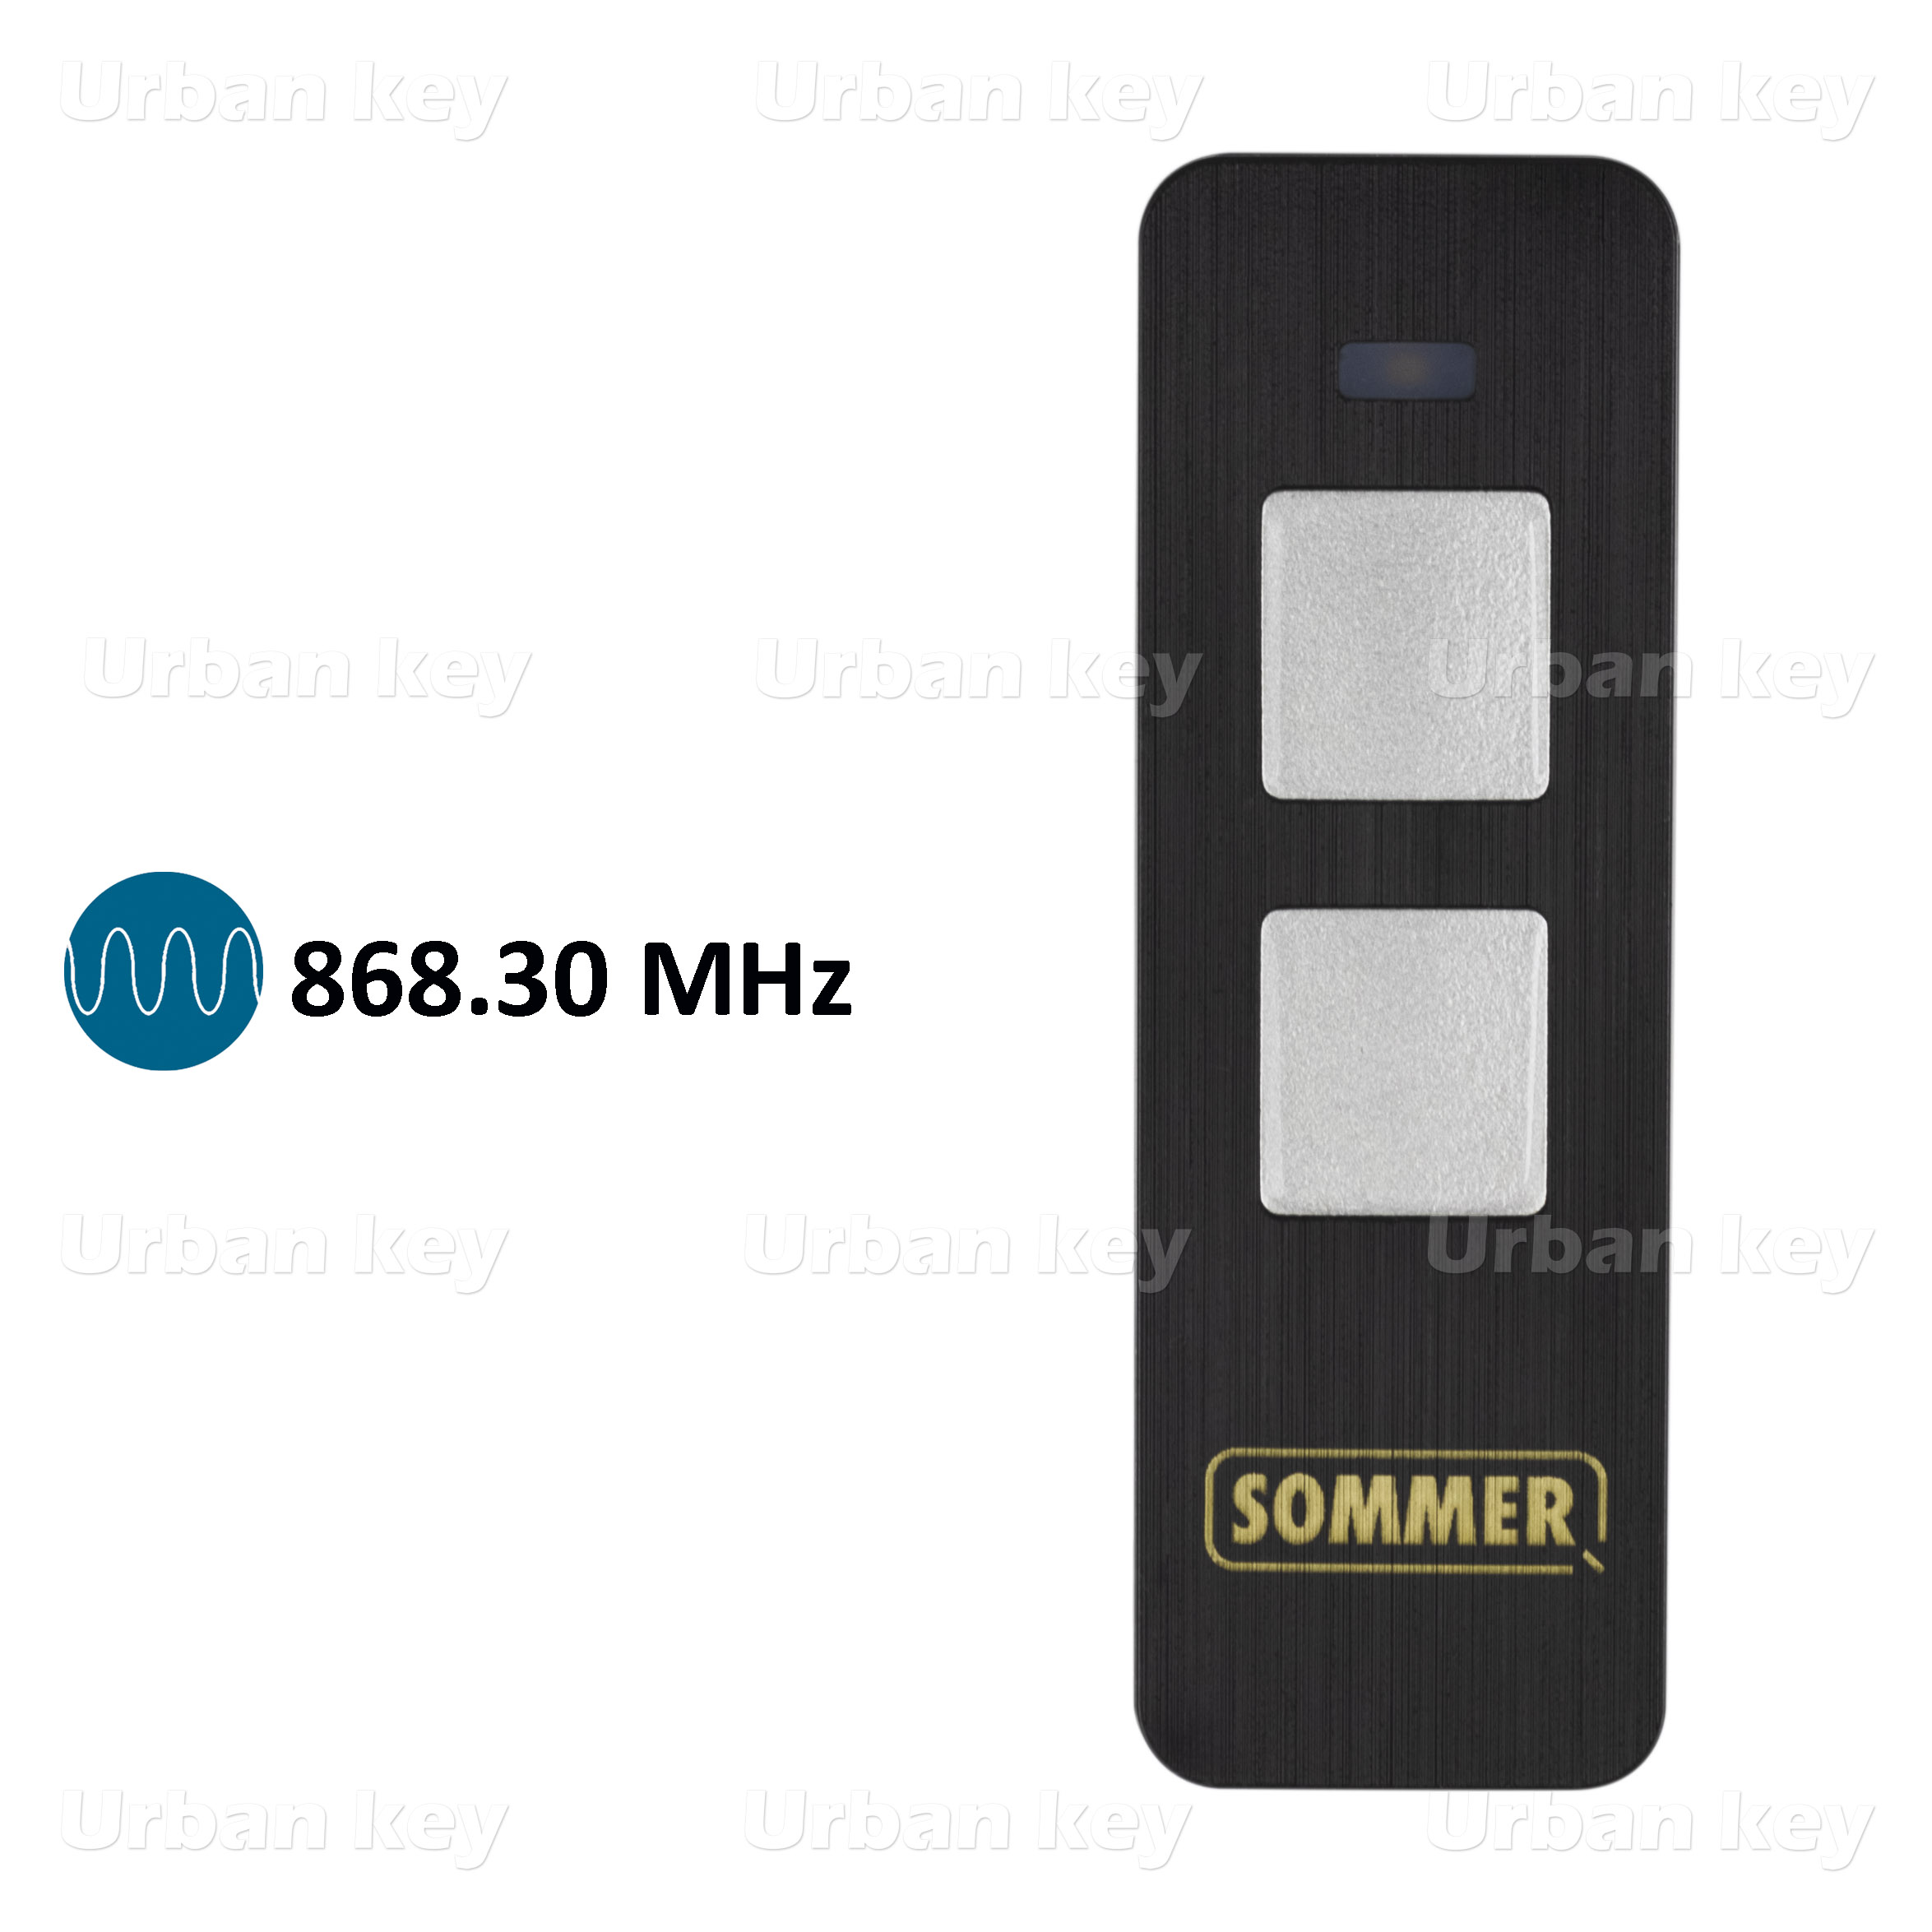 EMISSOR SOMMER S10019  PEARL TWIN 868 MHZ 2 CANAIS